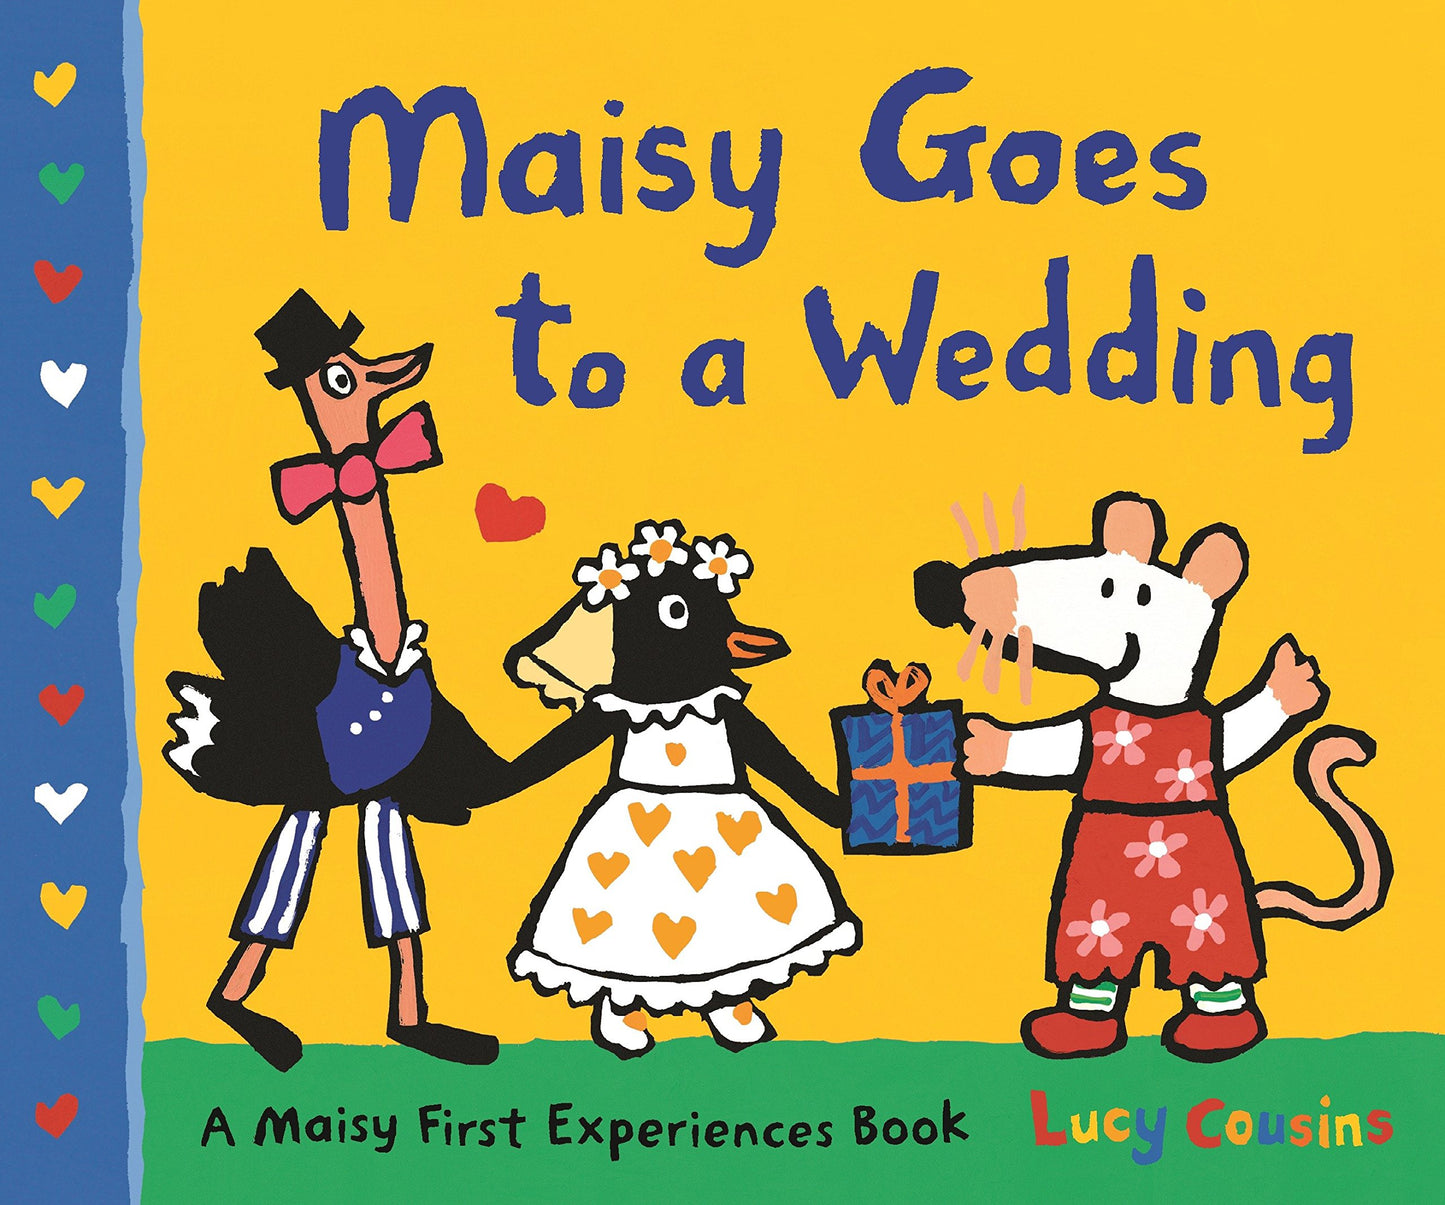 Maisy Goes to a Wedding - A Maisy First Experiences Book by Lucy Cousins